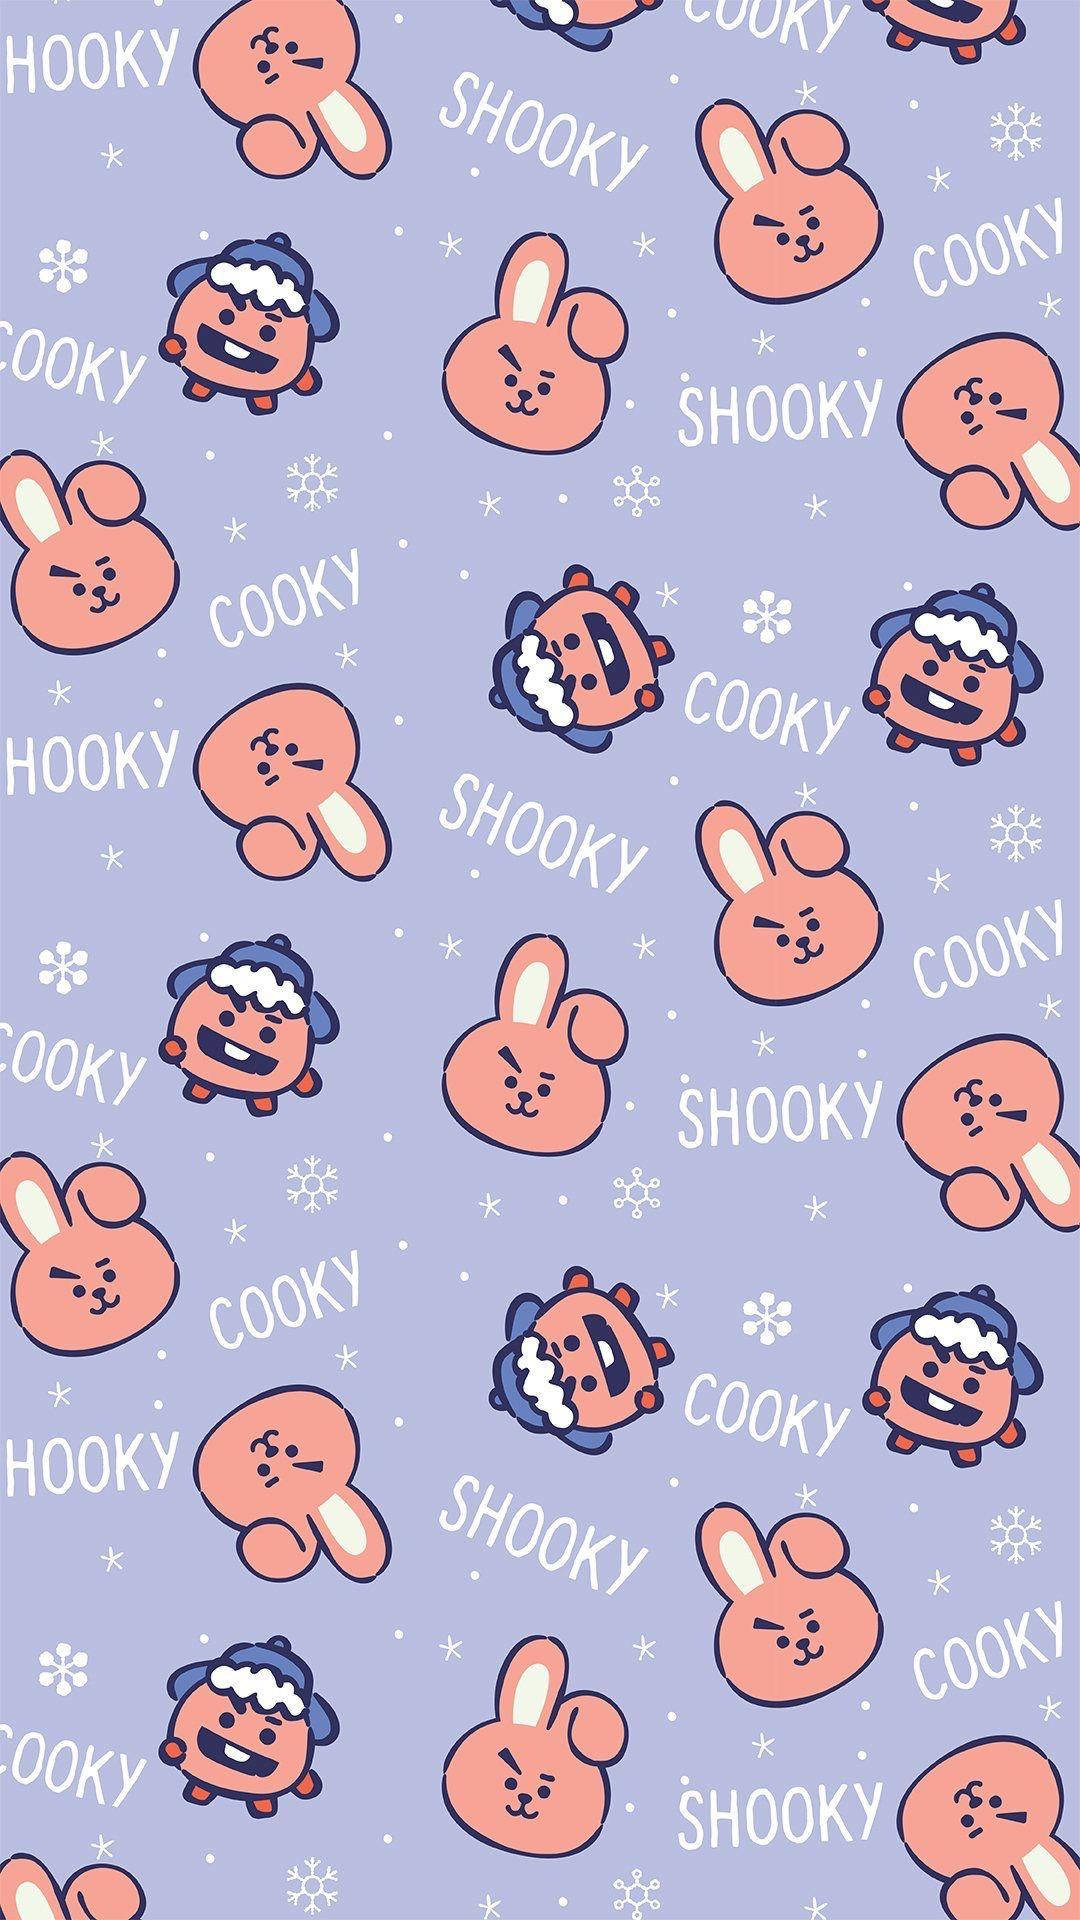 Cooky Bt21 With Shooky Poster Background